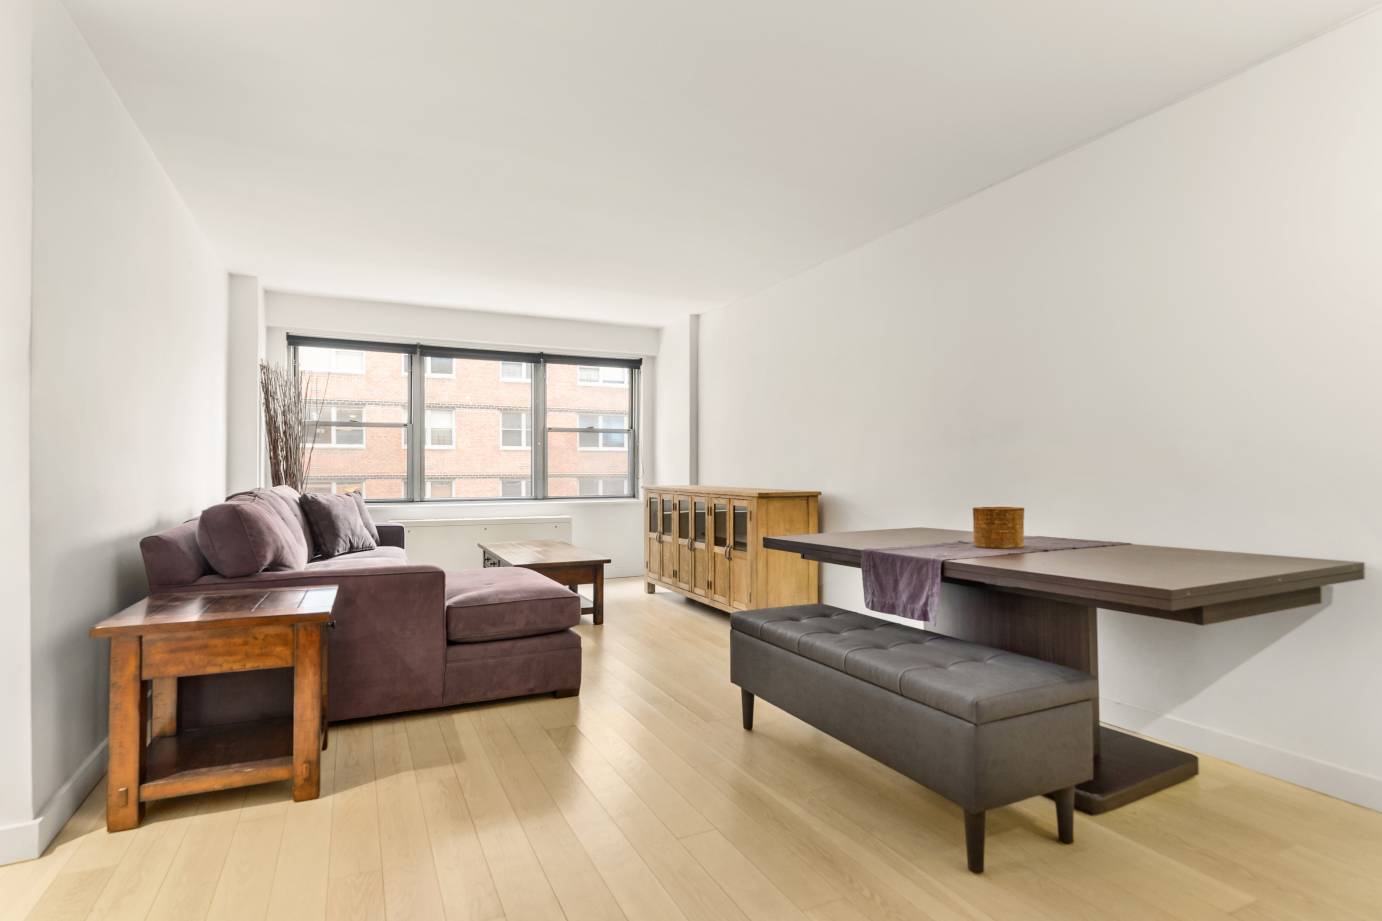 This mint condition one bedroom is perfectly located in a full service building just a block west of bustling Union Square.